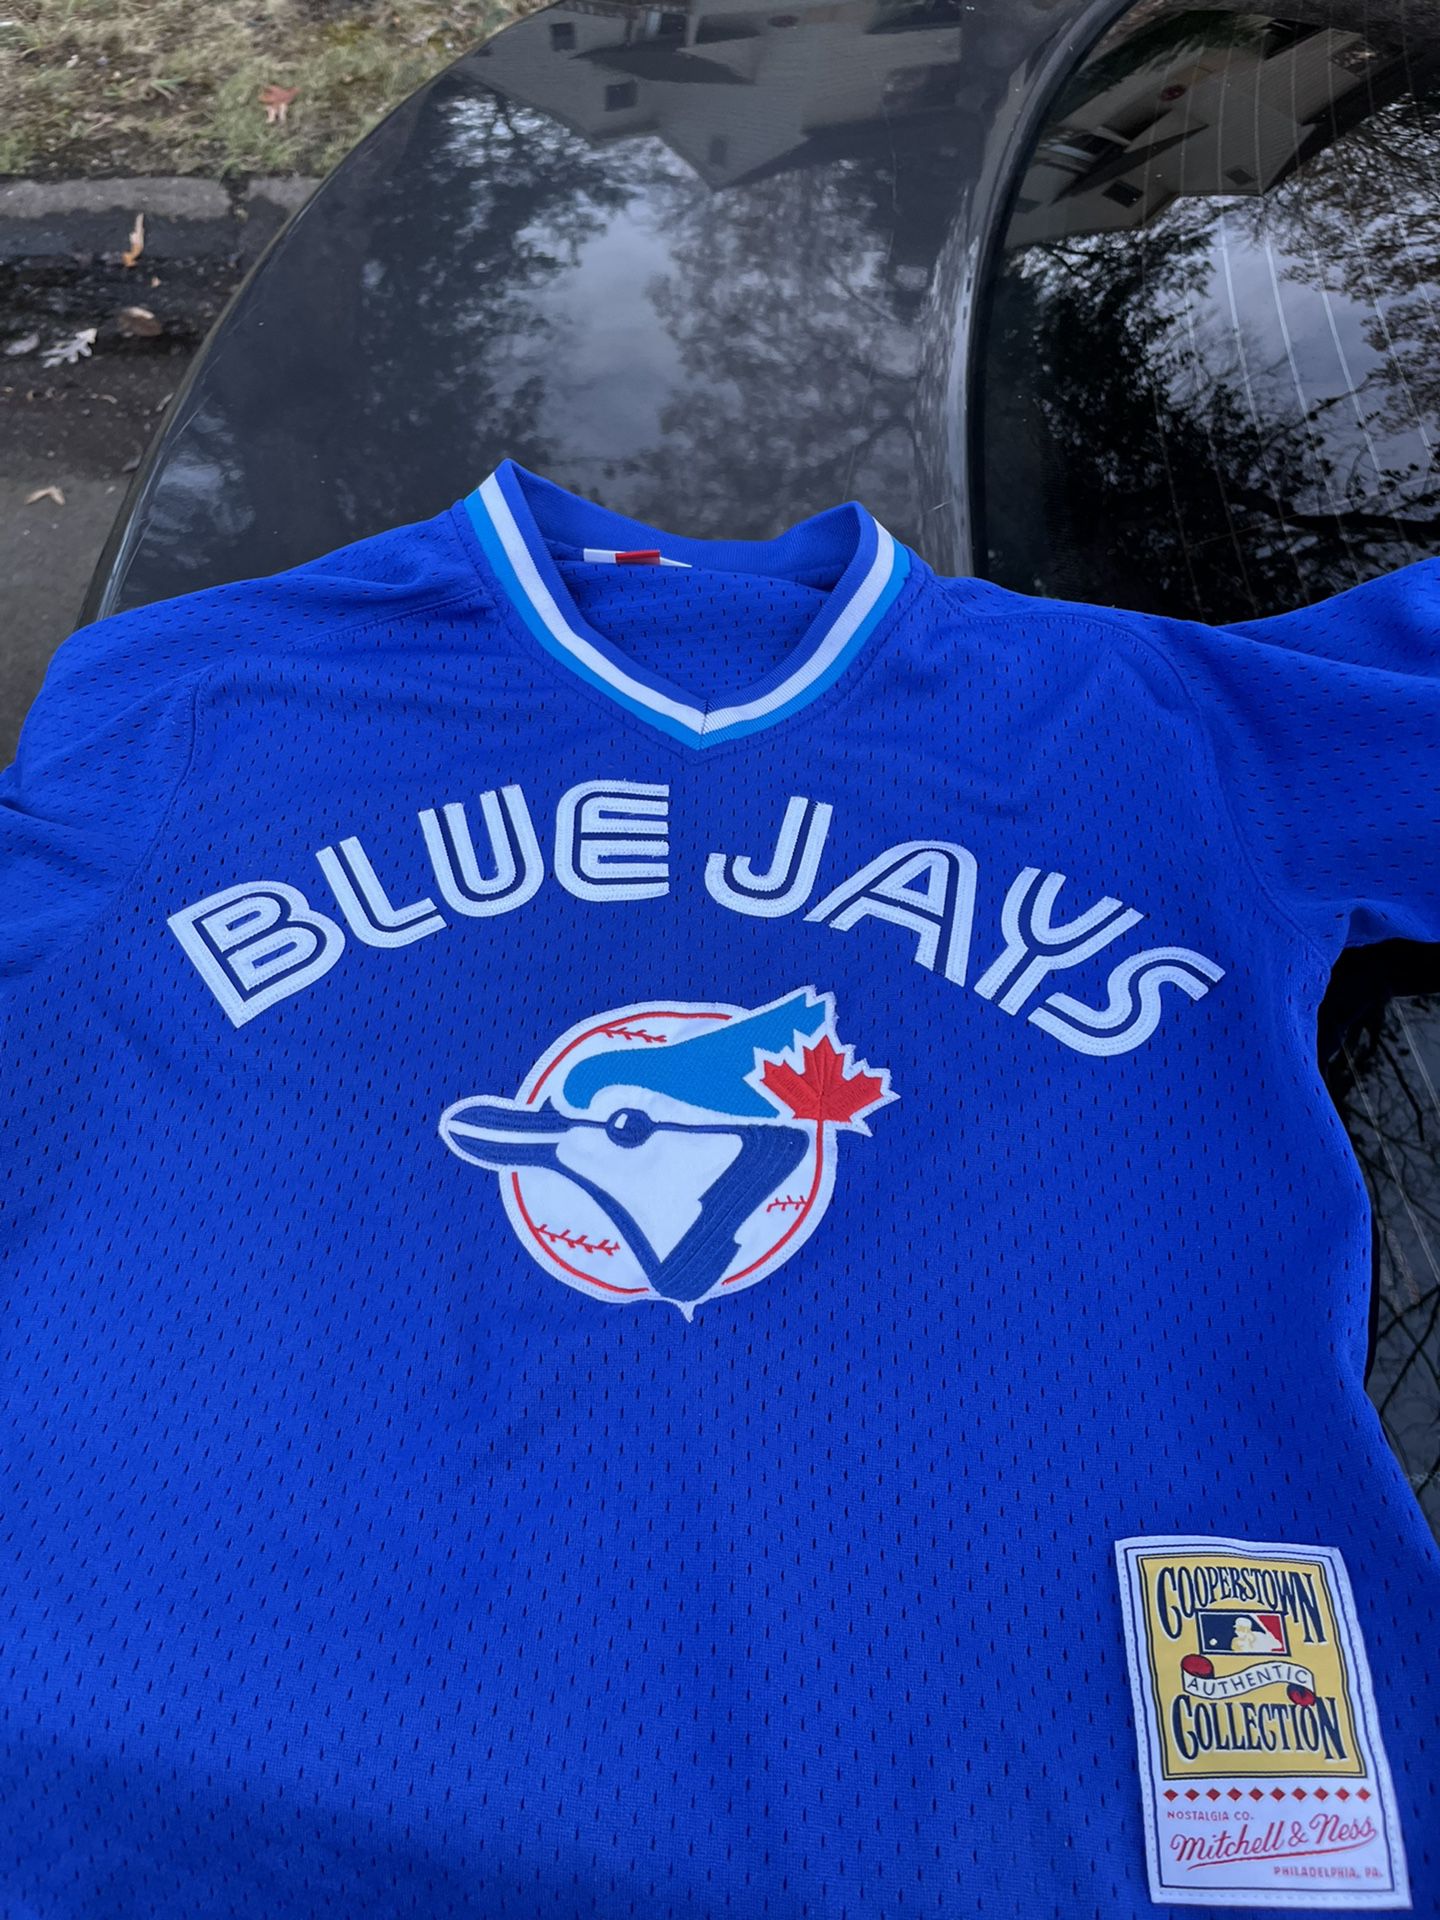 Authentic Mitchell & Ness Toronto Blue Jays #29 Baseball Jersey Size Small  for Sale in Midlothian, VA - OfferUp